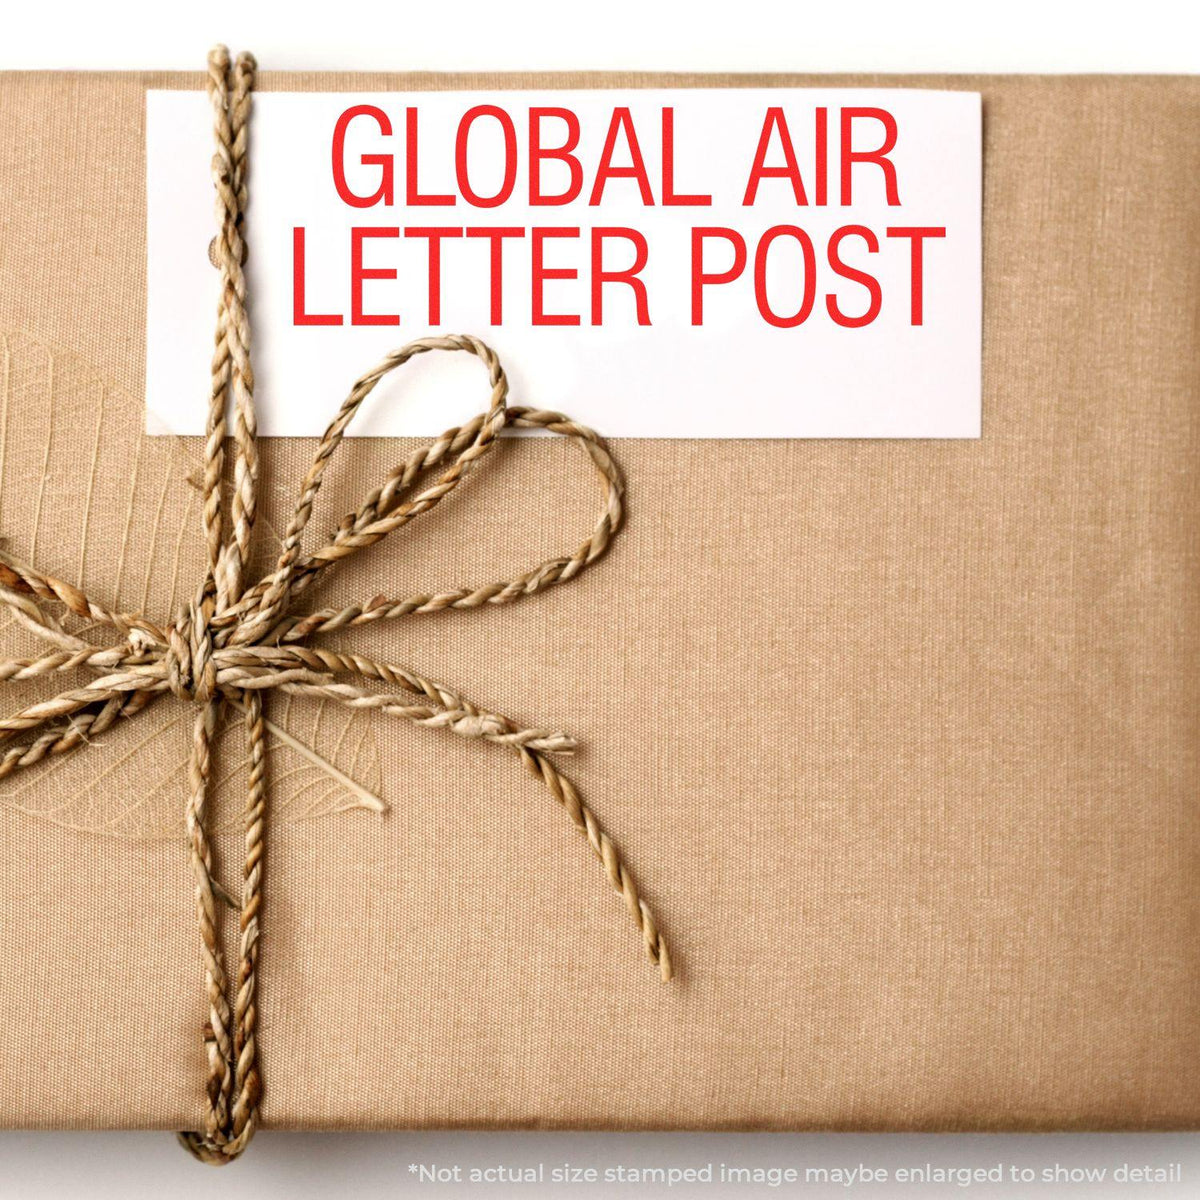 In Use Large Pre-Inked Global Air Letter Post Stamp Image